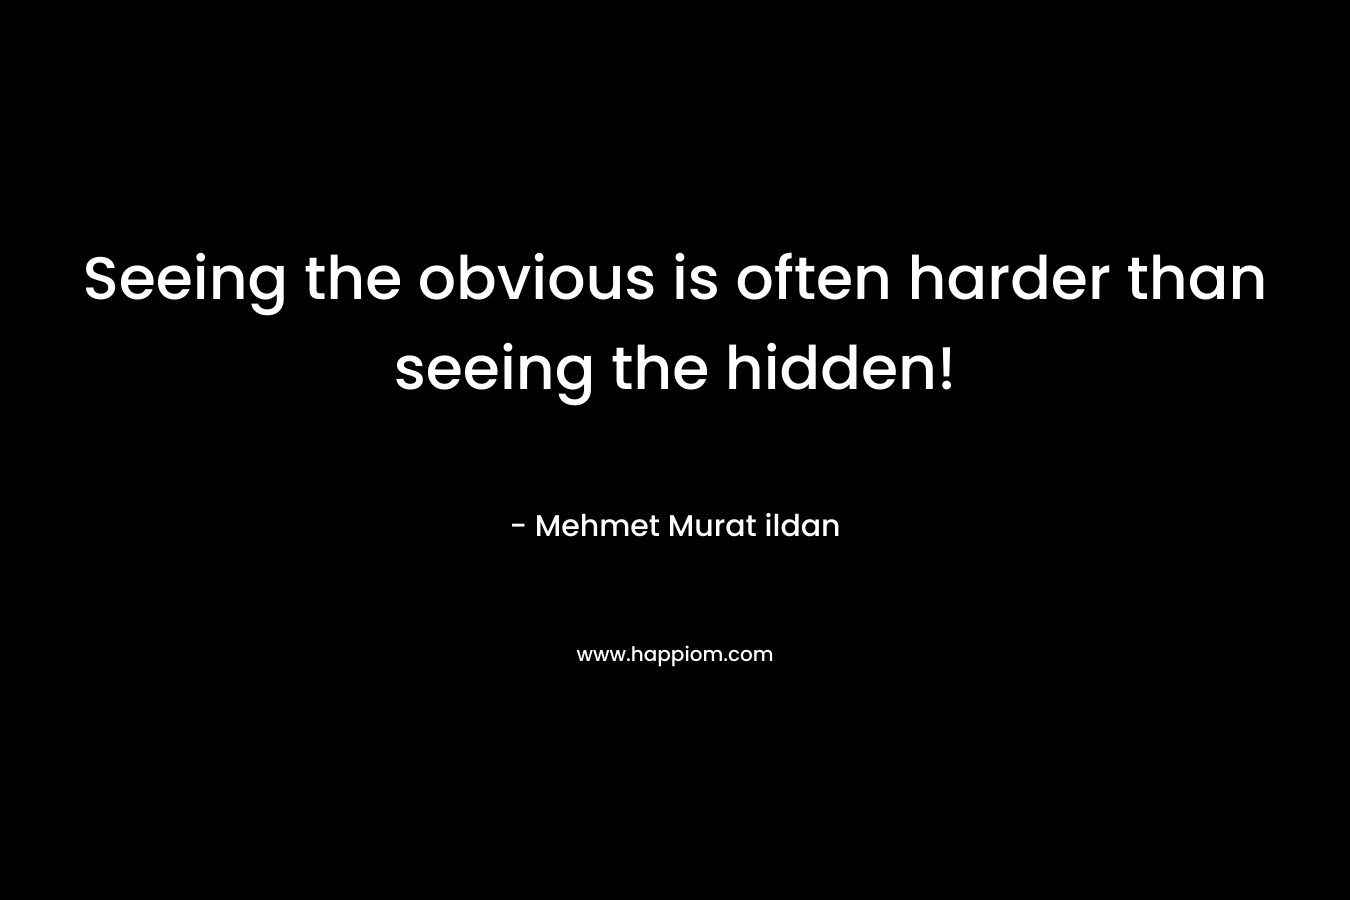 Seeing the obvious is often harder than seeing the hidden!